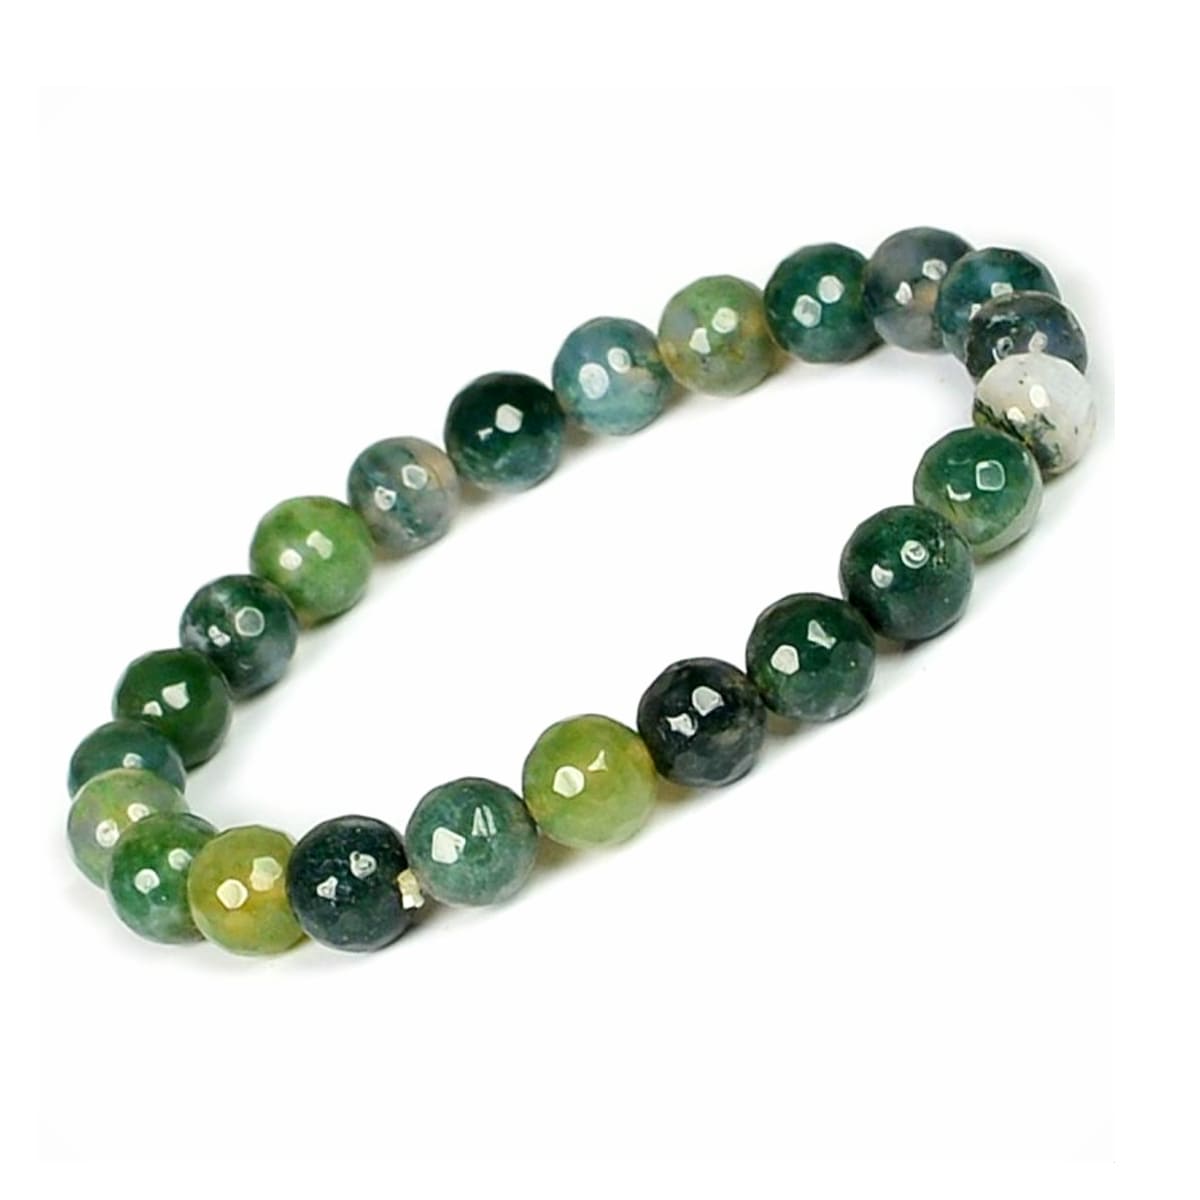 MOSS AGATE BRACELET – The Crystal Avenues